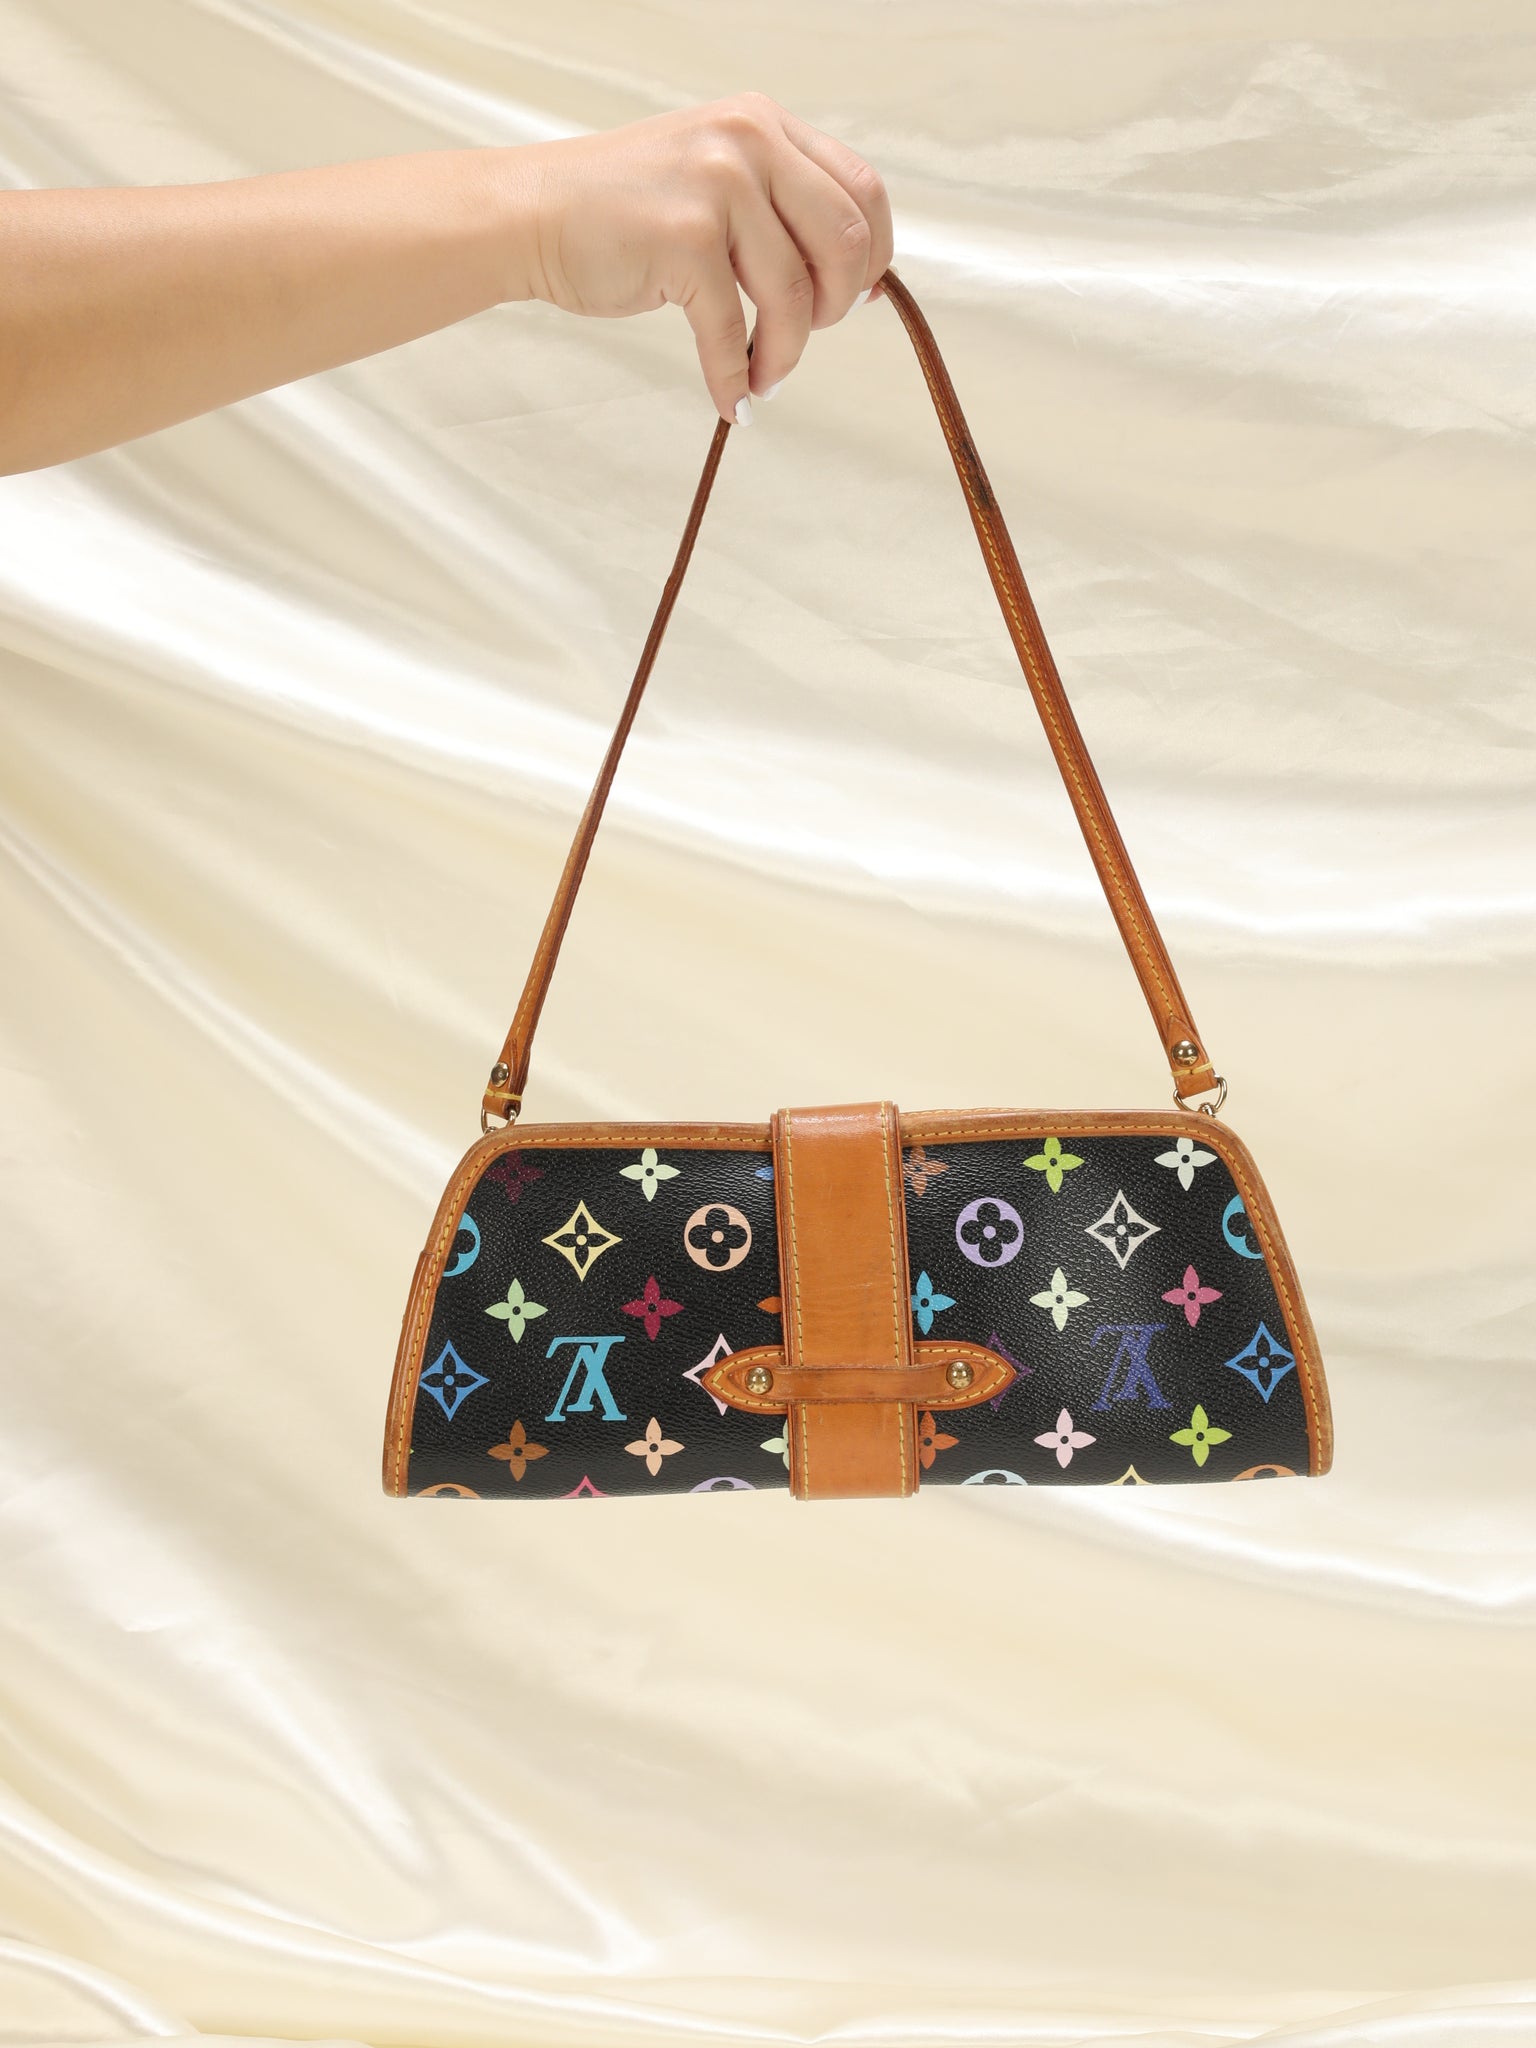 Rare Louis Vuitton x Takashi Murakami Multicolore Bag: What Fits, How Much,  and Is it Worth It? 